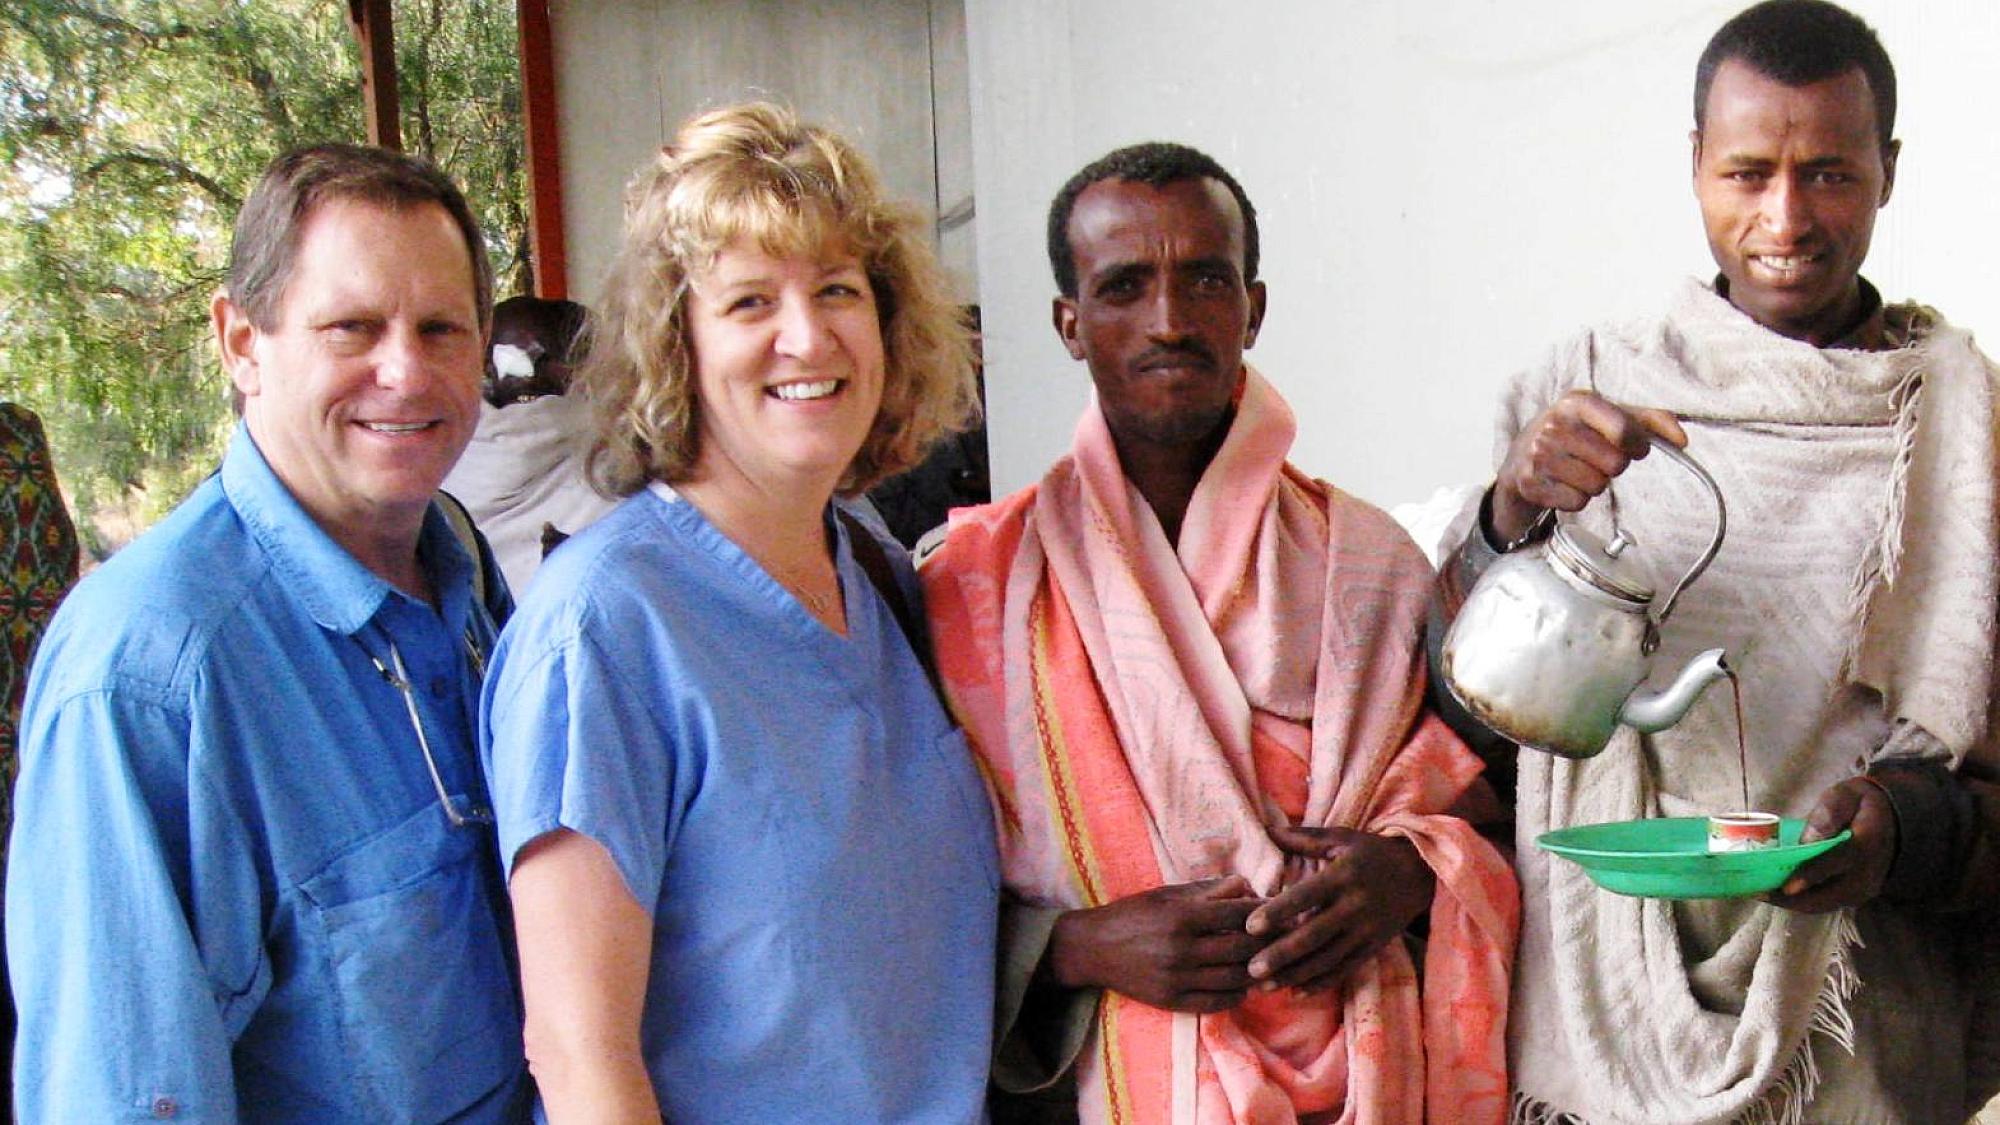 Dr. Crandall and his wife Julie Crandall often volunteered together on international outreach trips.